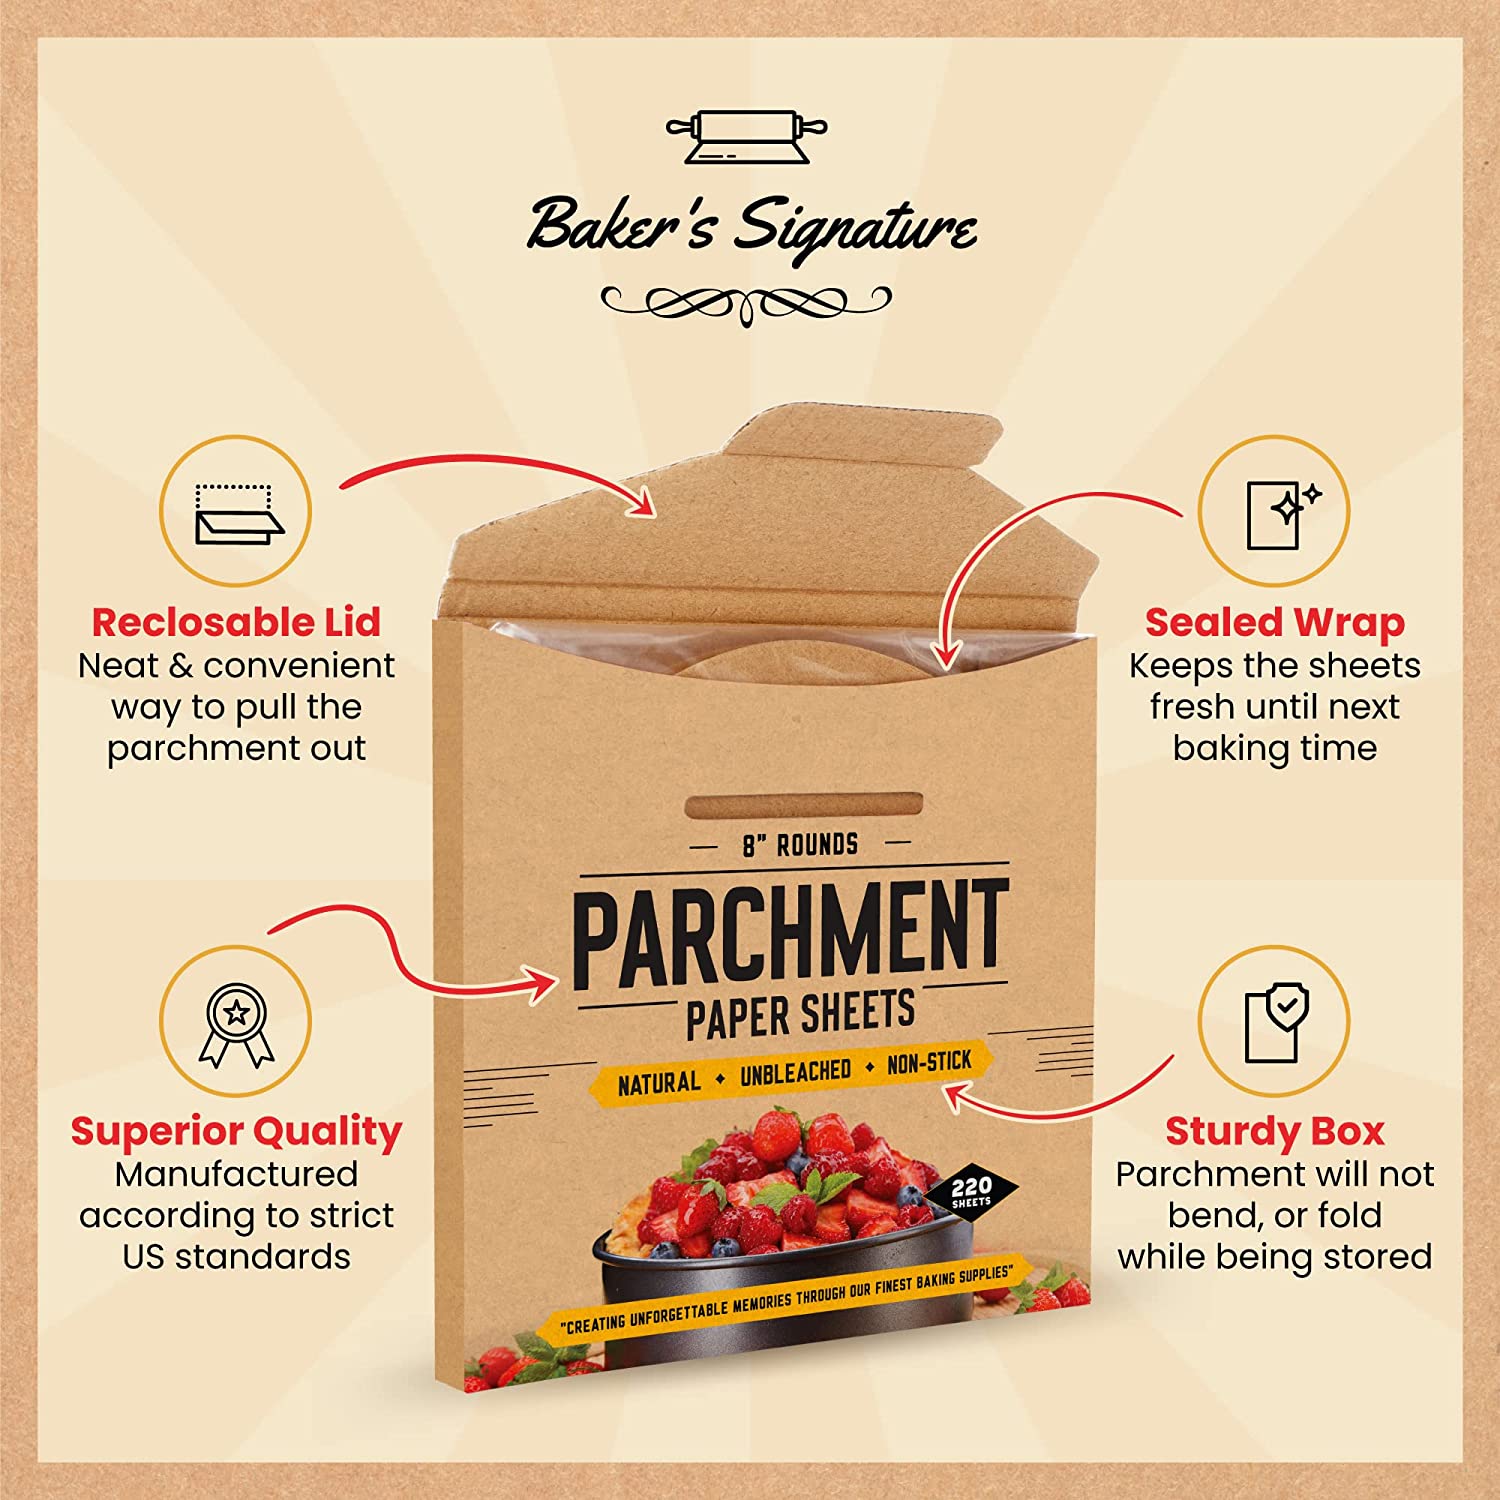 8 Inch Rounds Pack of 220 Parchment Paper Baking Sheets by Baker's